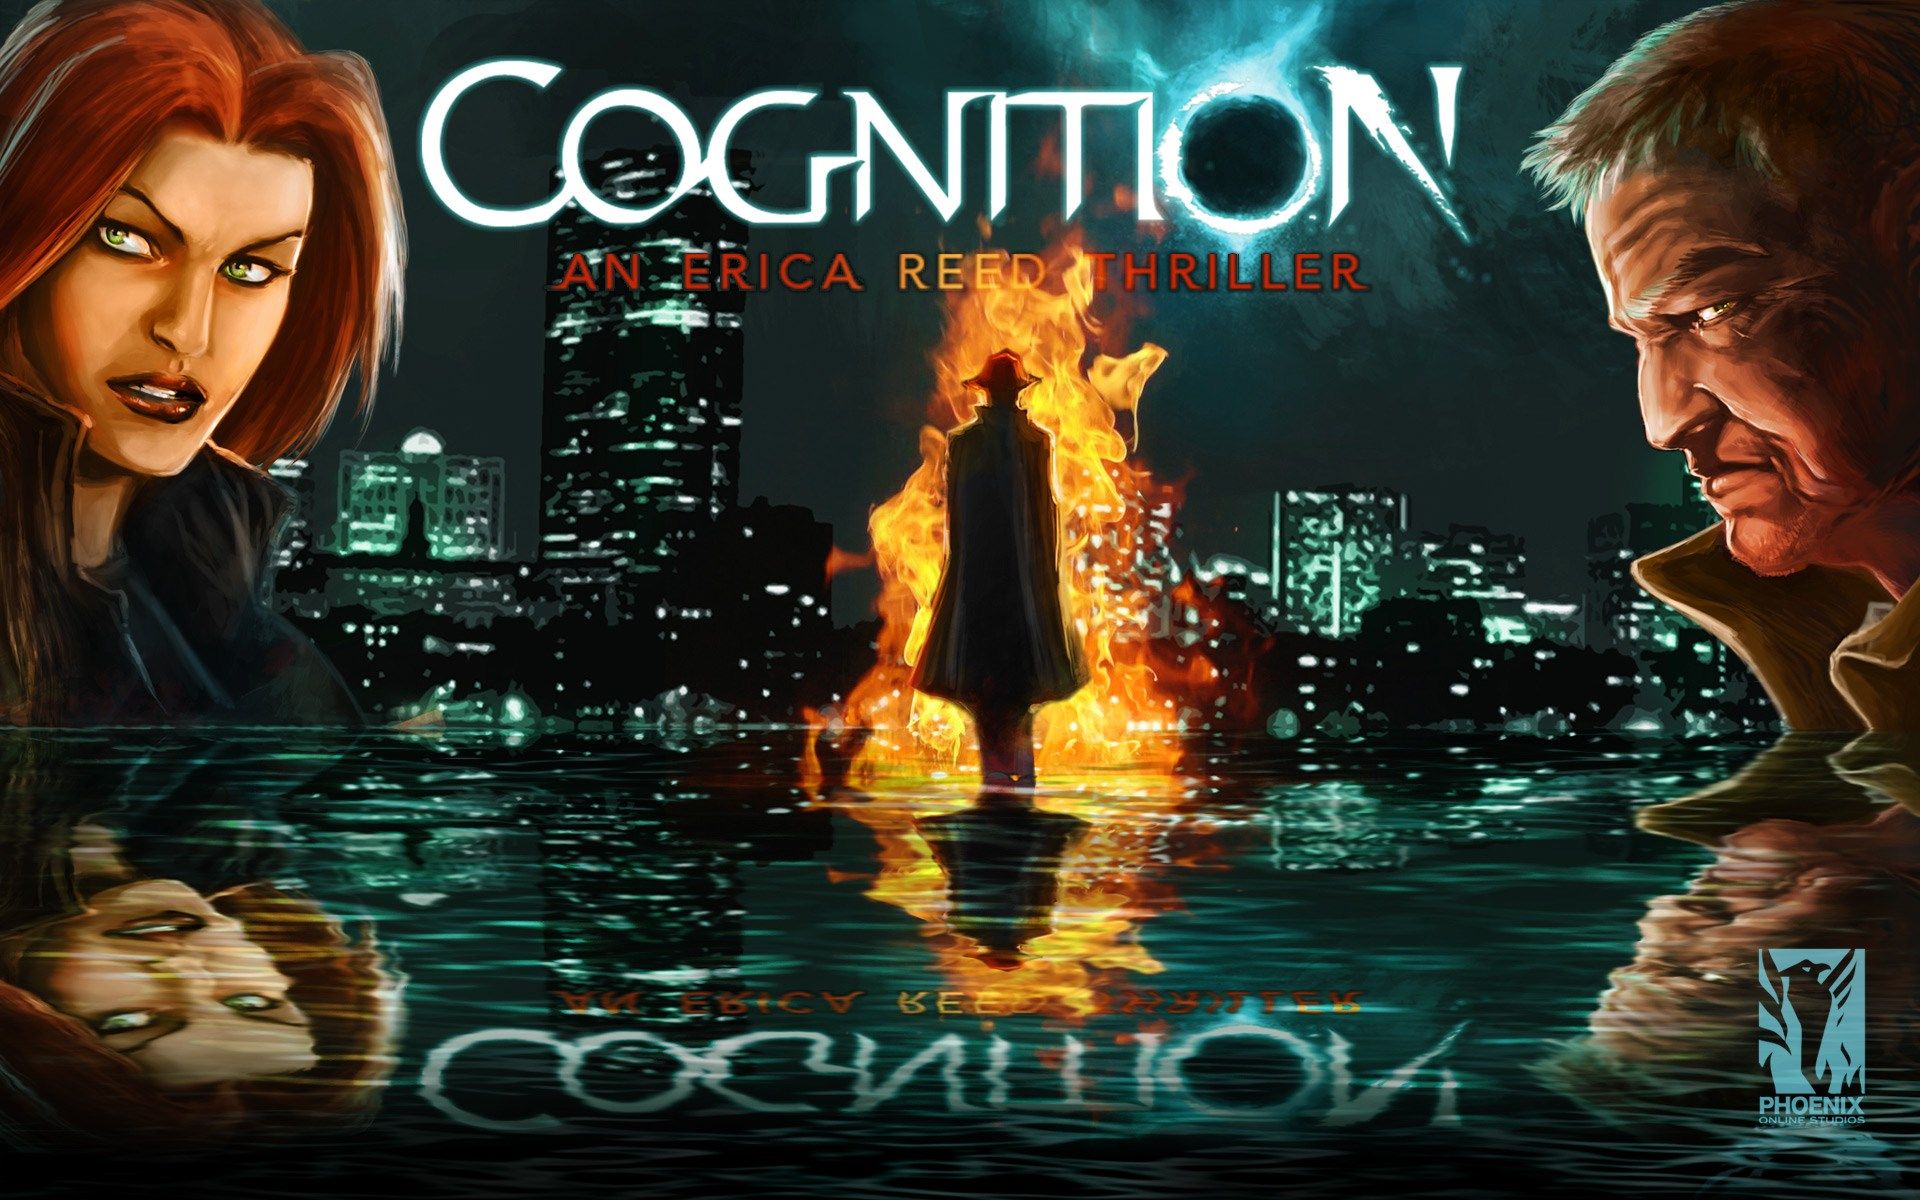 Cognition An Erica Reed Thriller Game Wallpaper